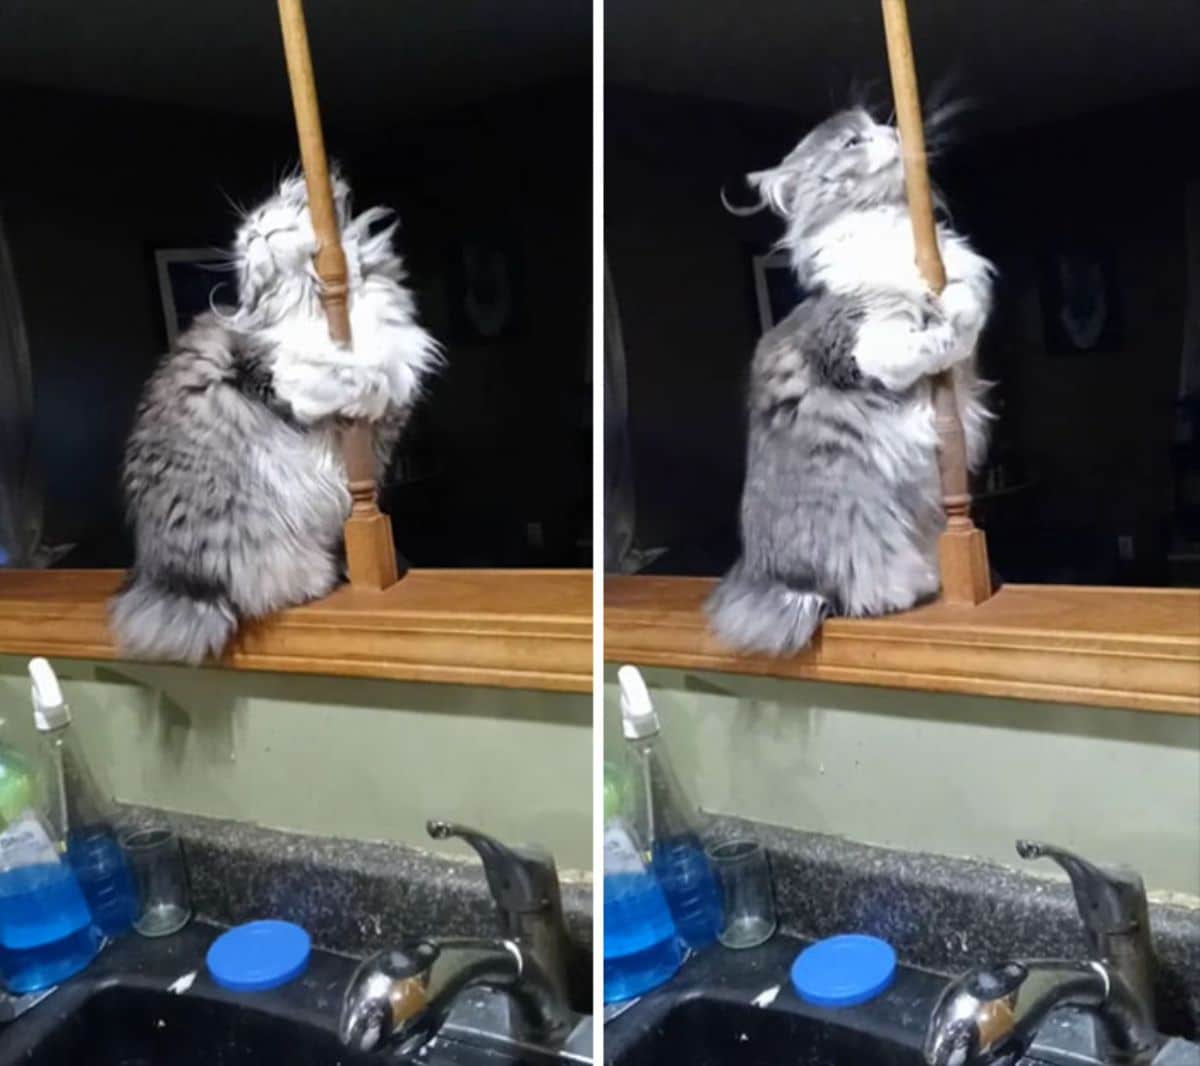 2 photos of a grey and white fluffy cat holding on to a wooden pole